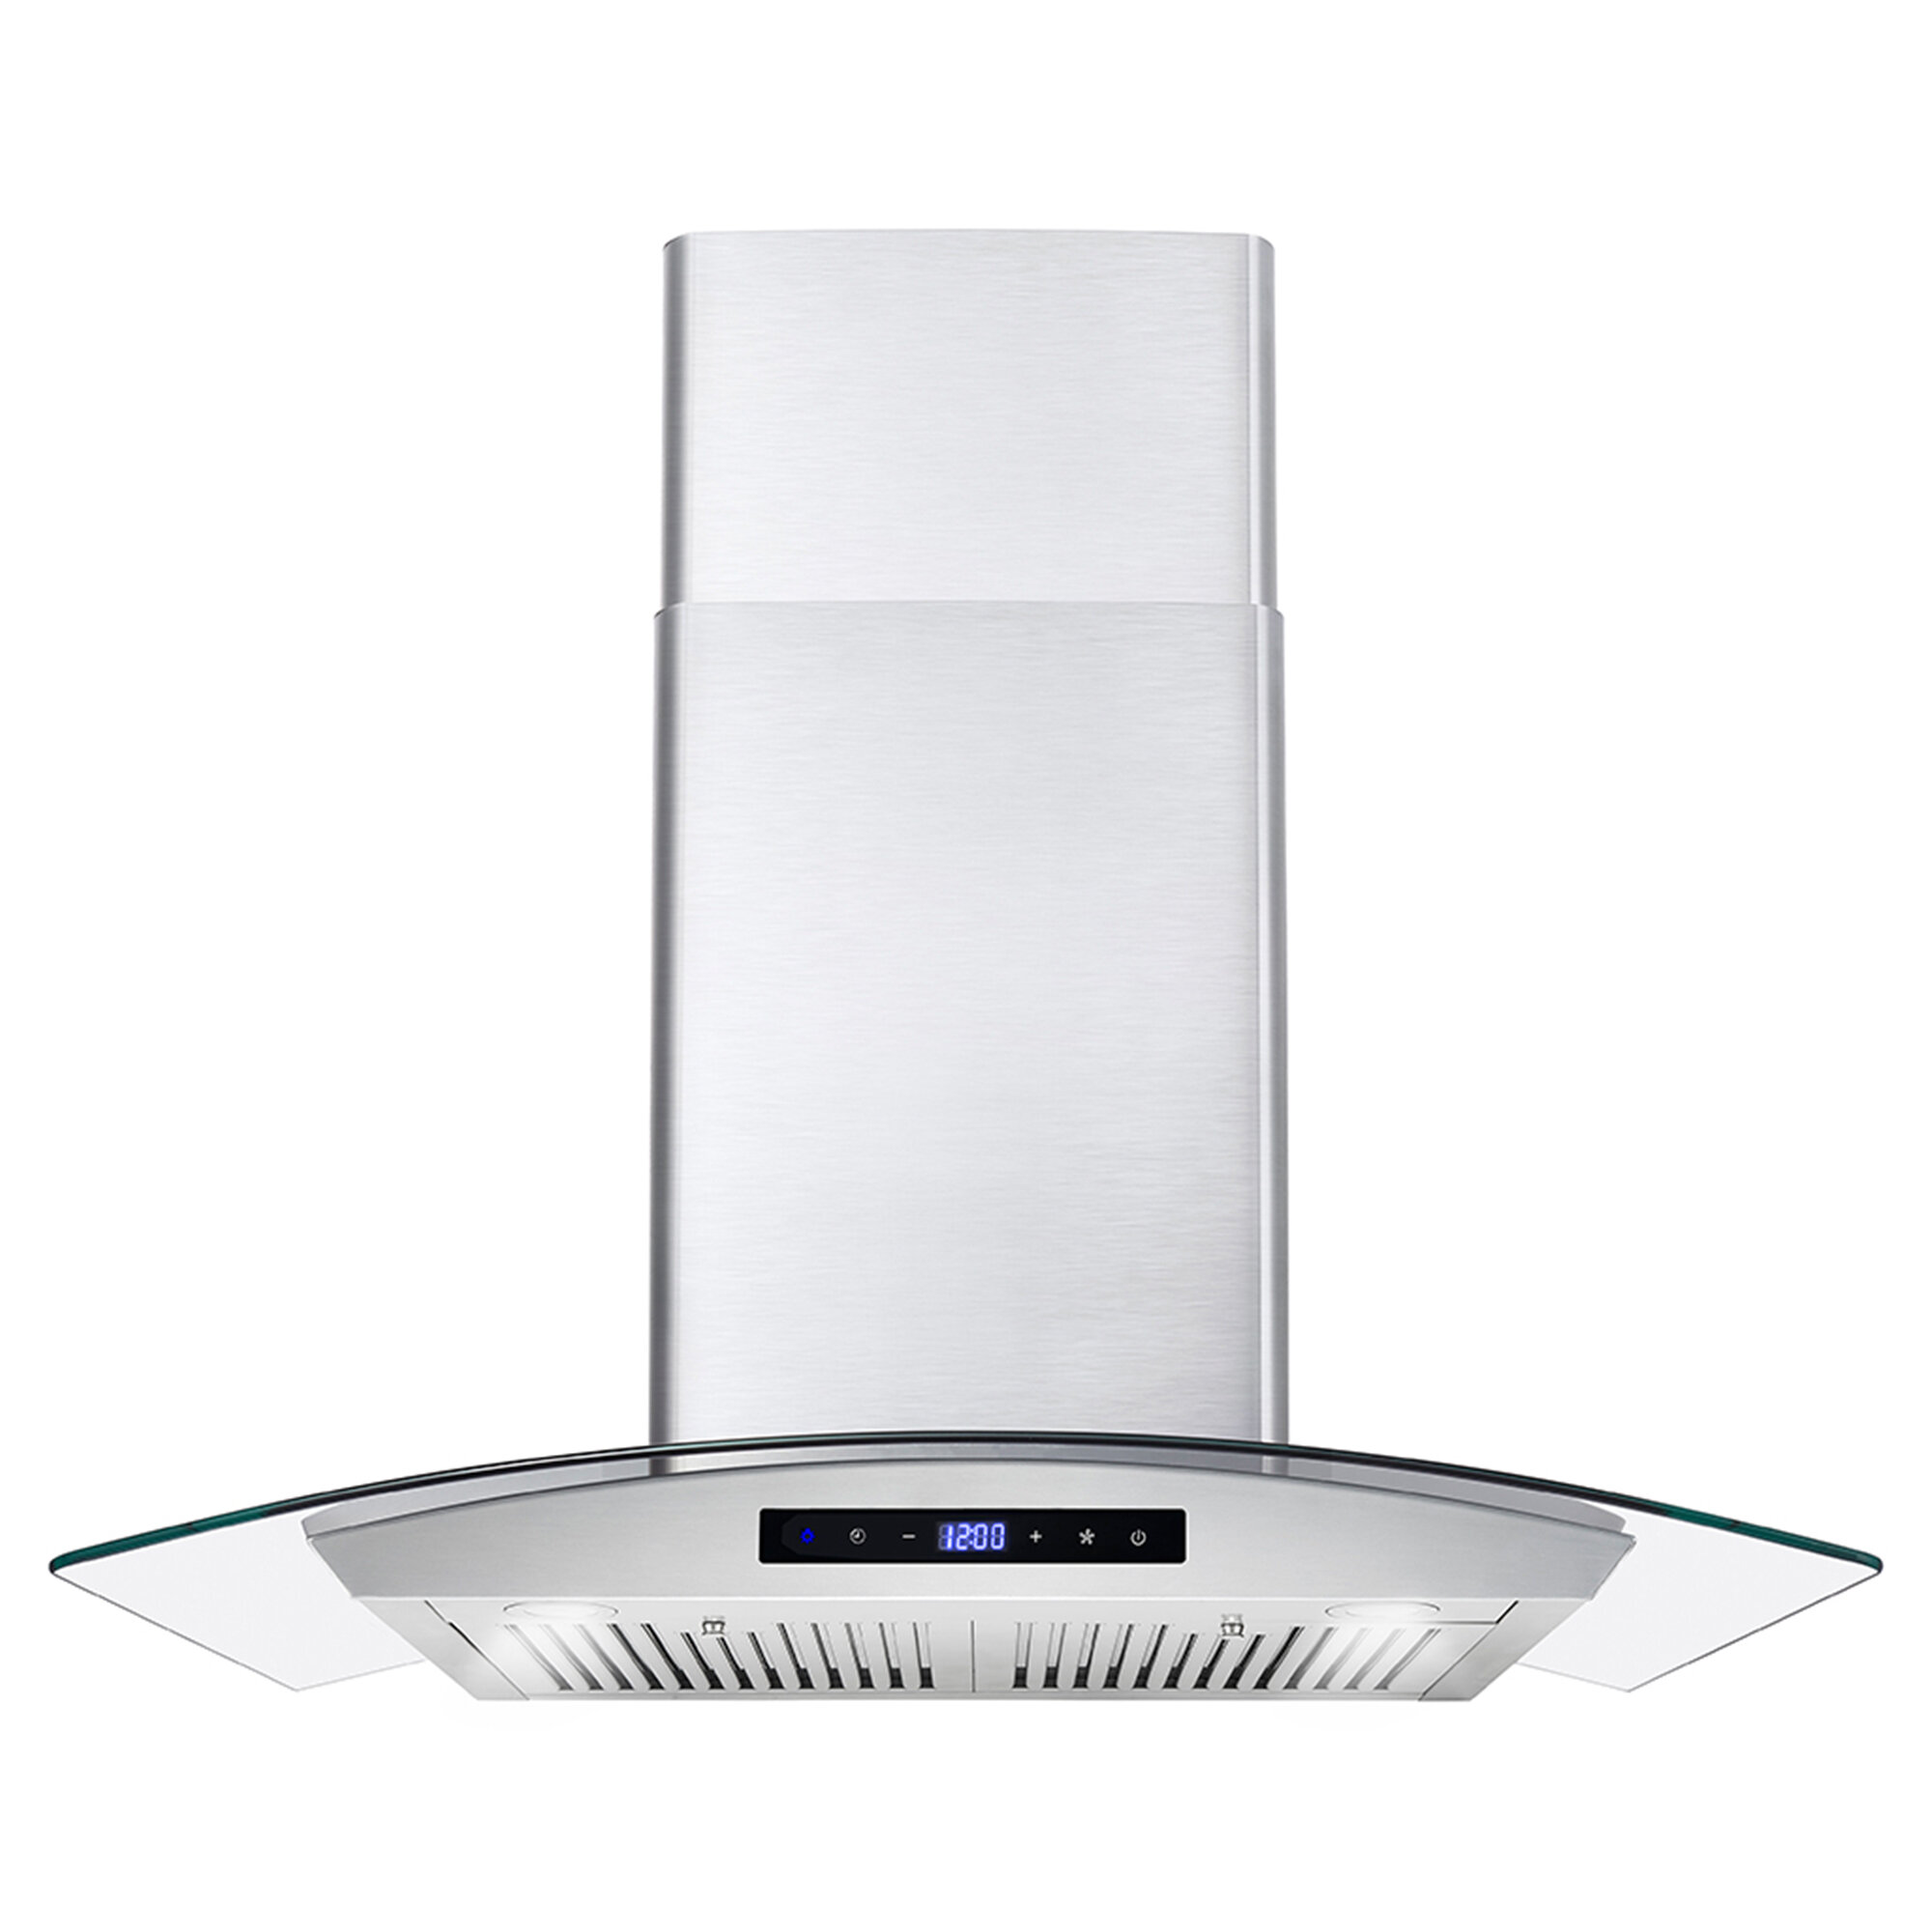 30 in. Ductless Island Range Hood in Stainless Steel with LED Lighting and  Carbon Filter Kit for Recirculating